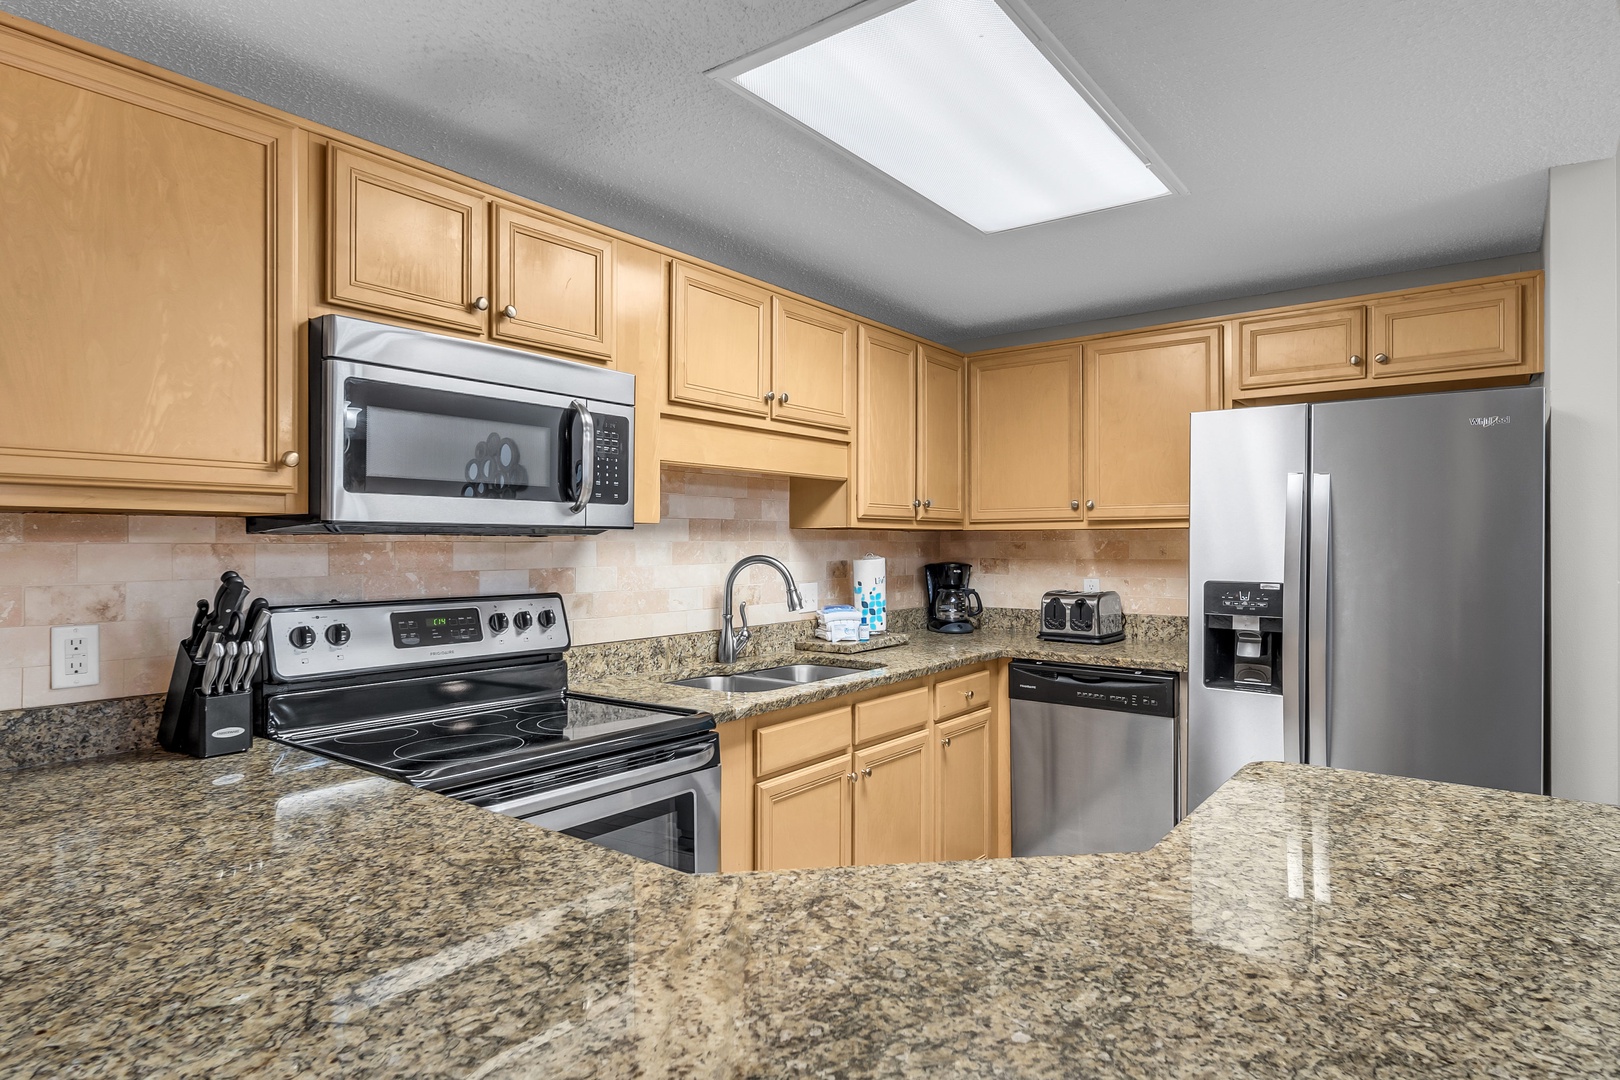 The large, fully stocked Kitchen boasts new Stainless appliances and Granite countertops, ensuring a perfect setting for culinary endeavors.